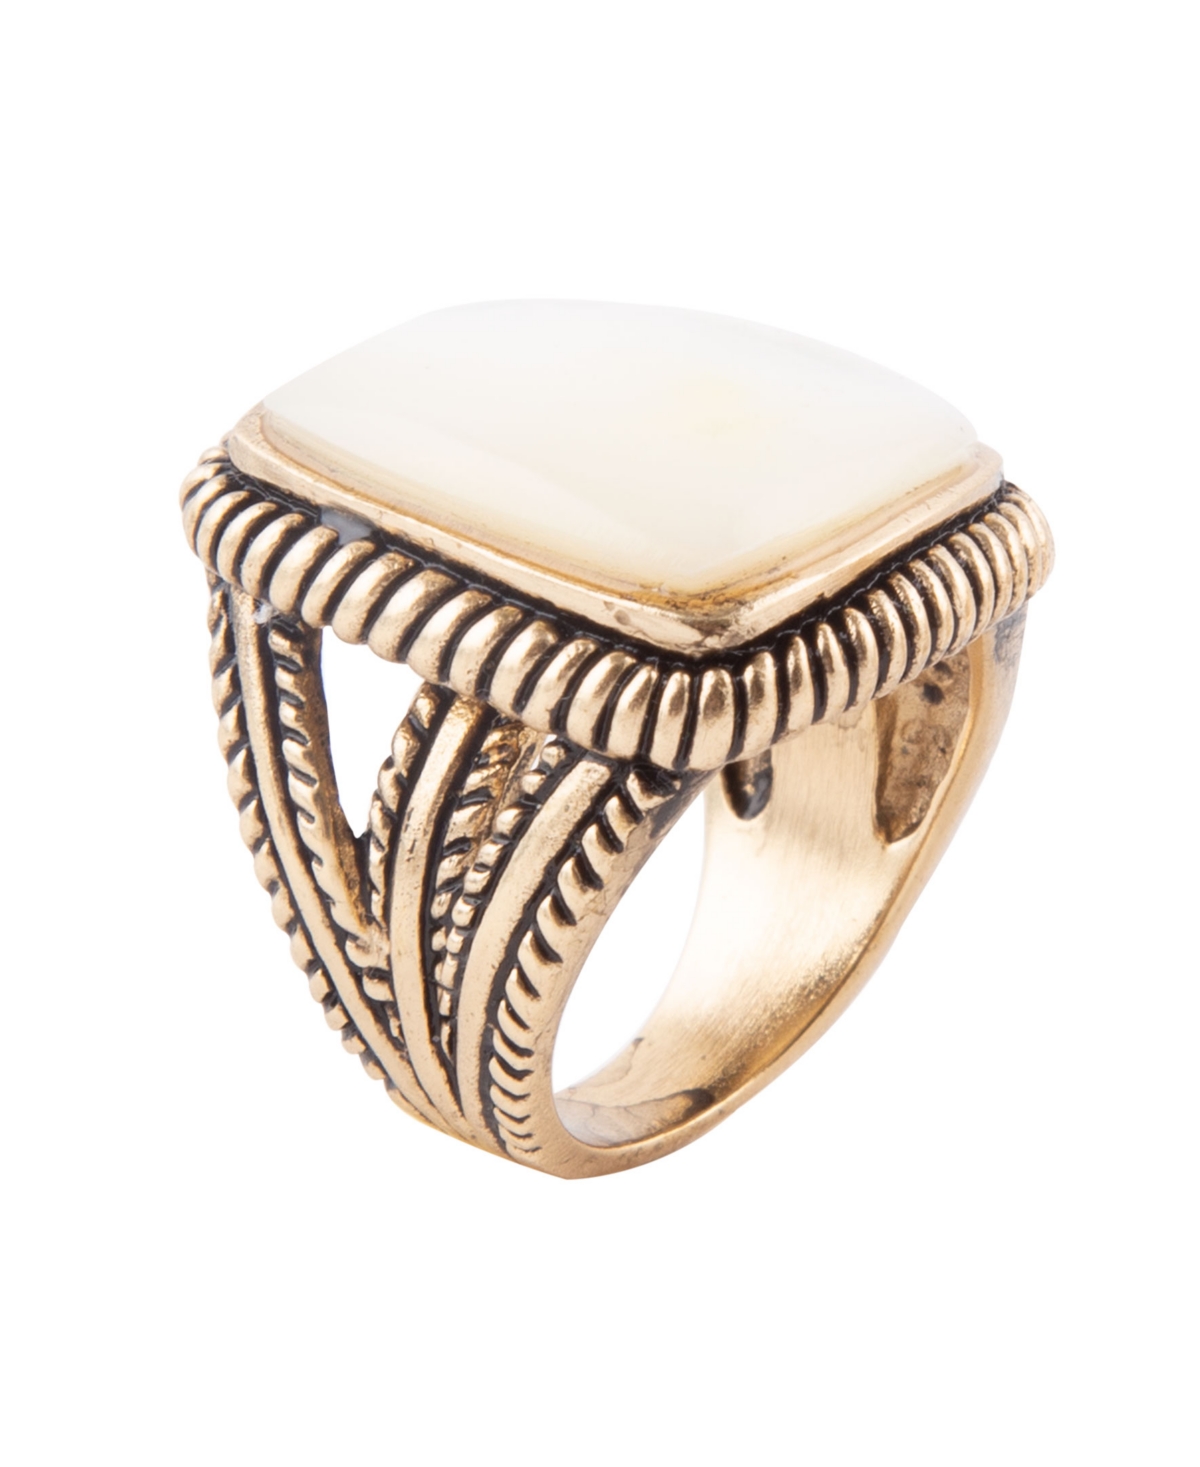 Navajo Bronze and Genuine Mother-of-Pearl Statement Ring - Mother-of-Pearl